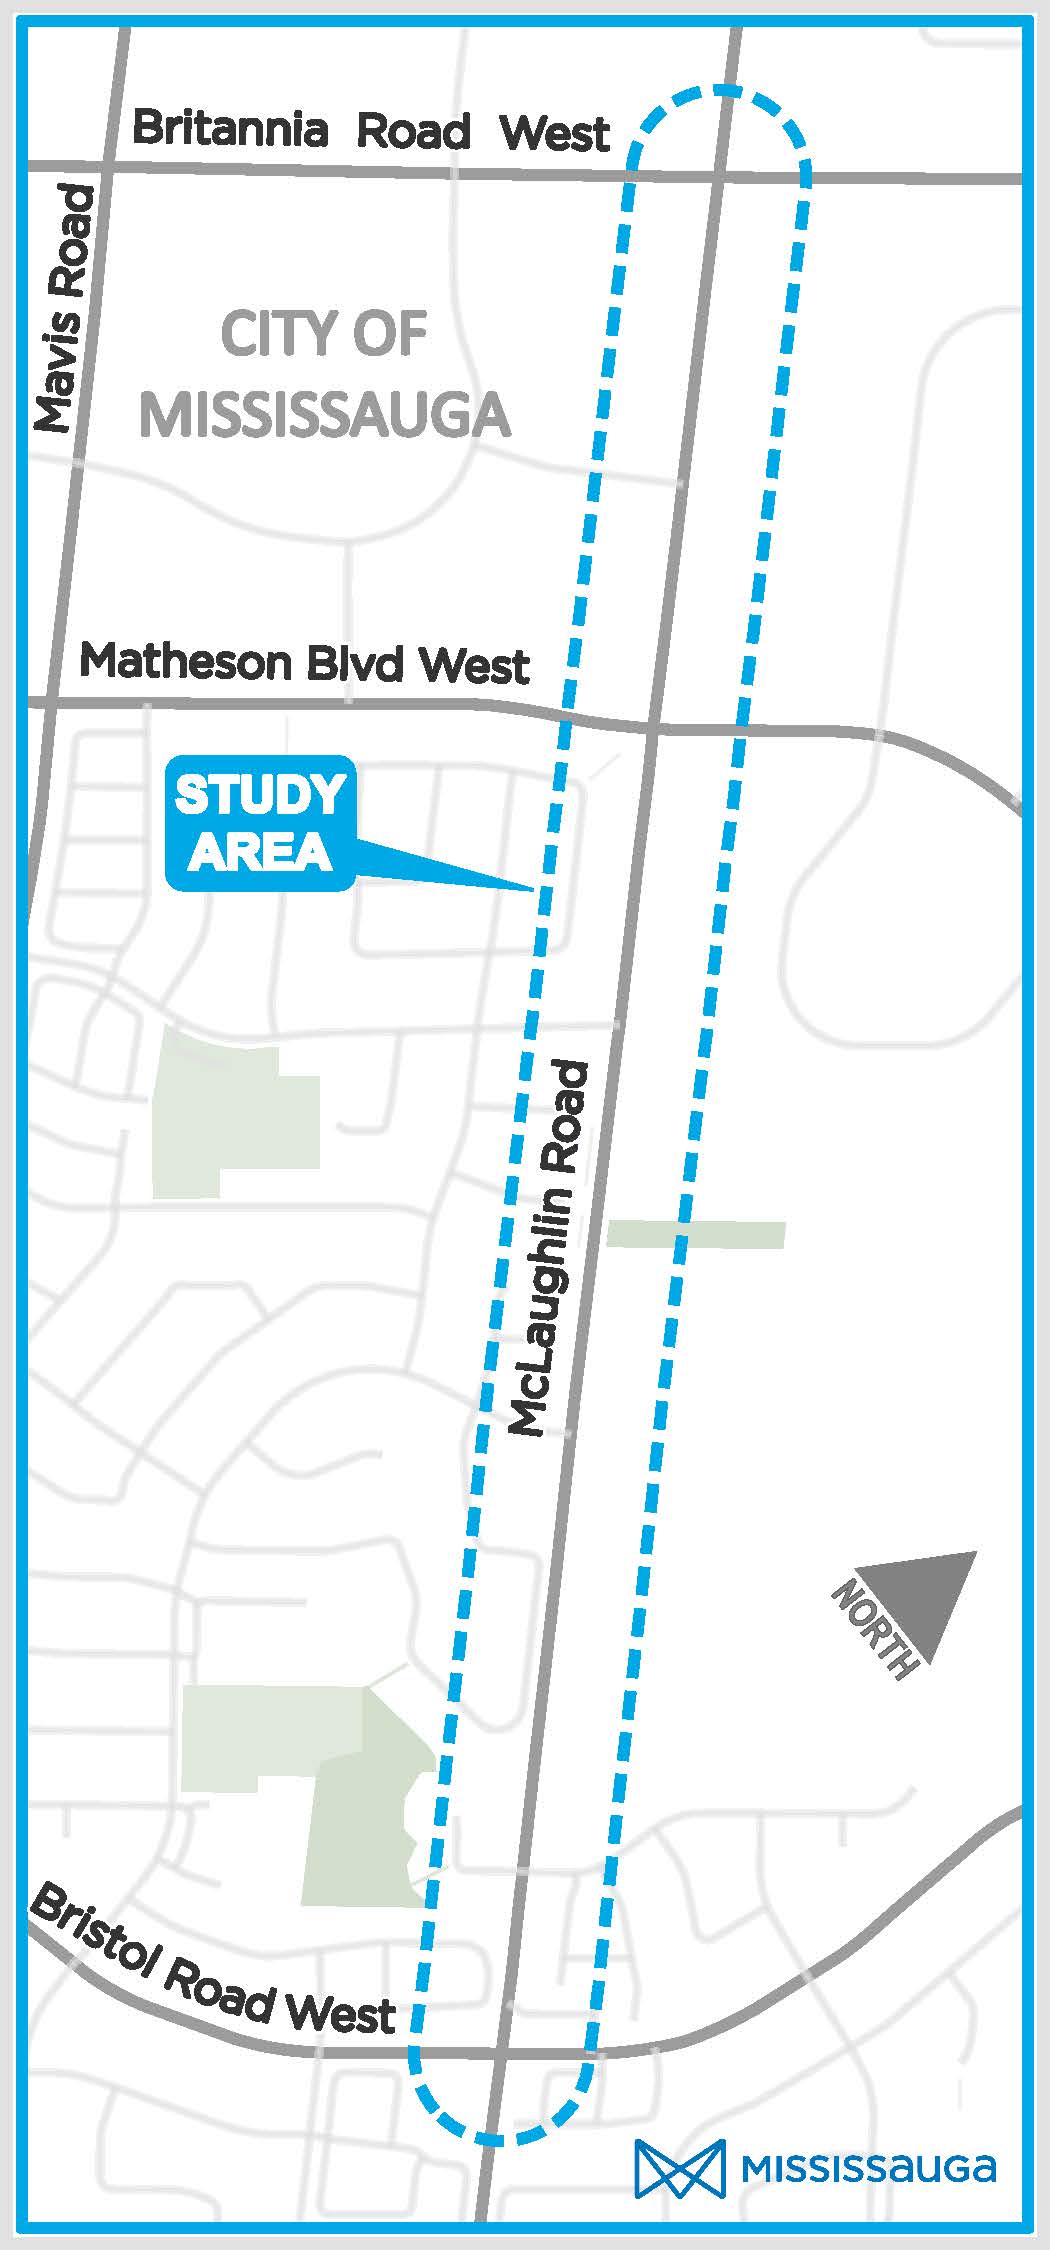 Map of the study area, covering McLaughlin Road from Bristol Road West in the South to Britannia Road West in the North.